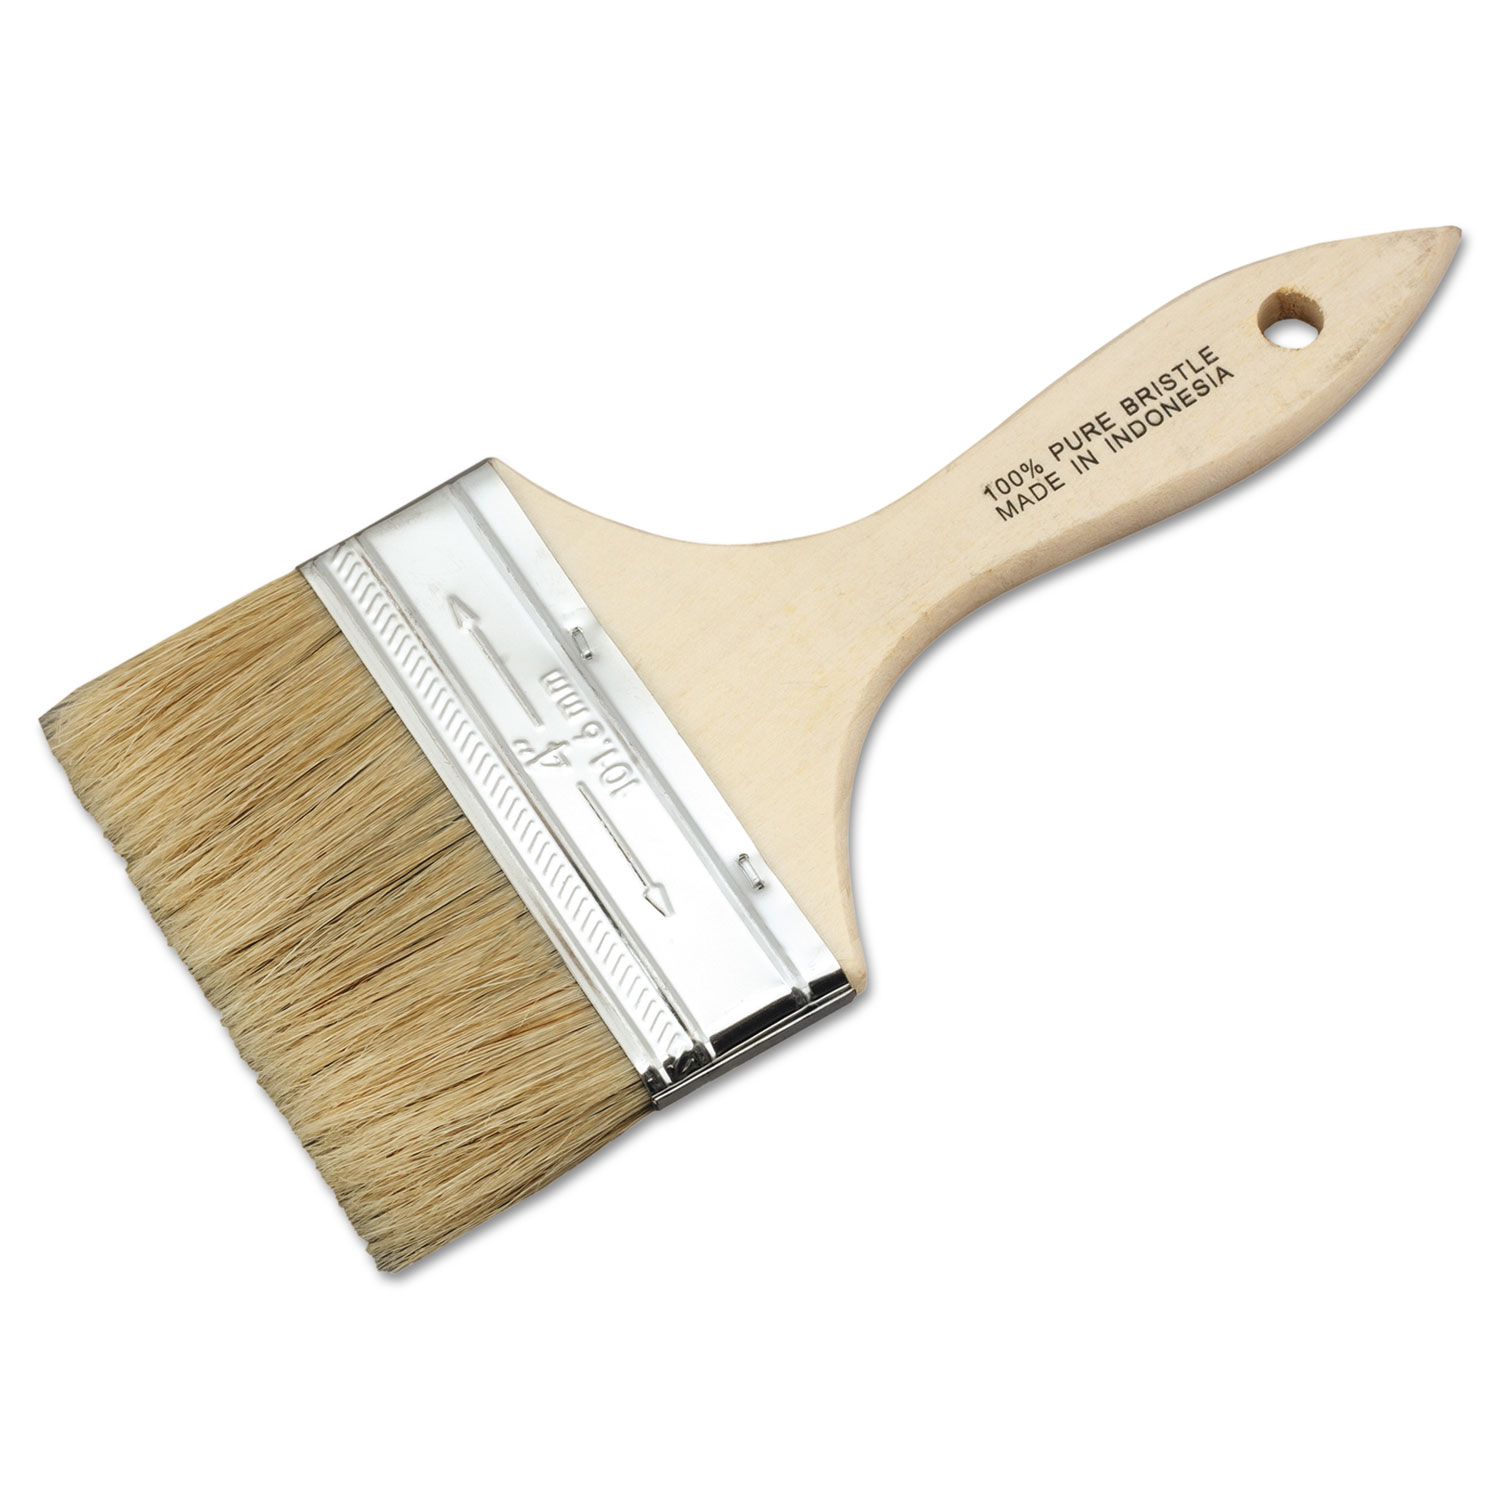  Magnolia Brush 236-S Low Cost Paint or Chip Brush, 4 (MNL236S) 